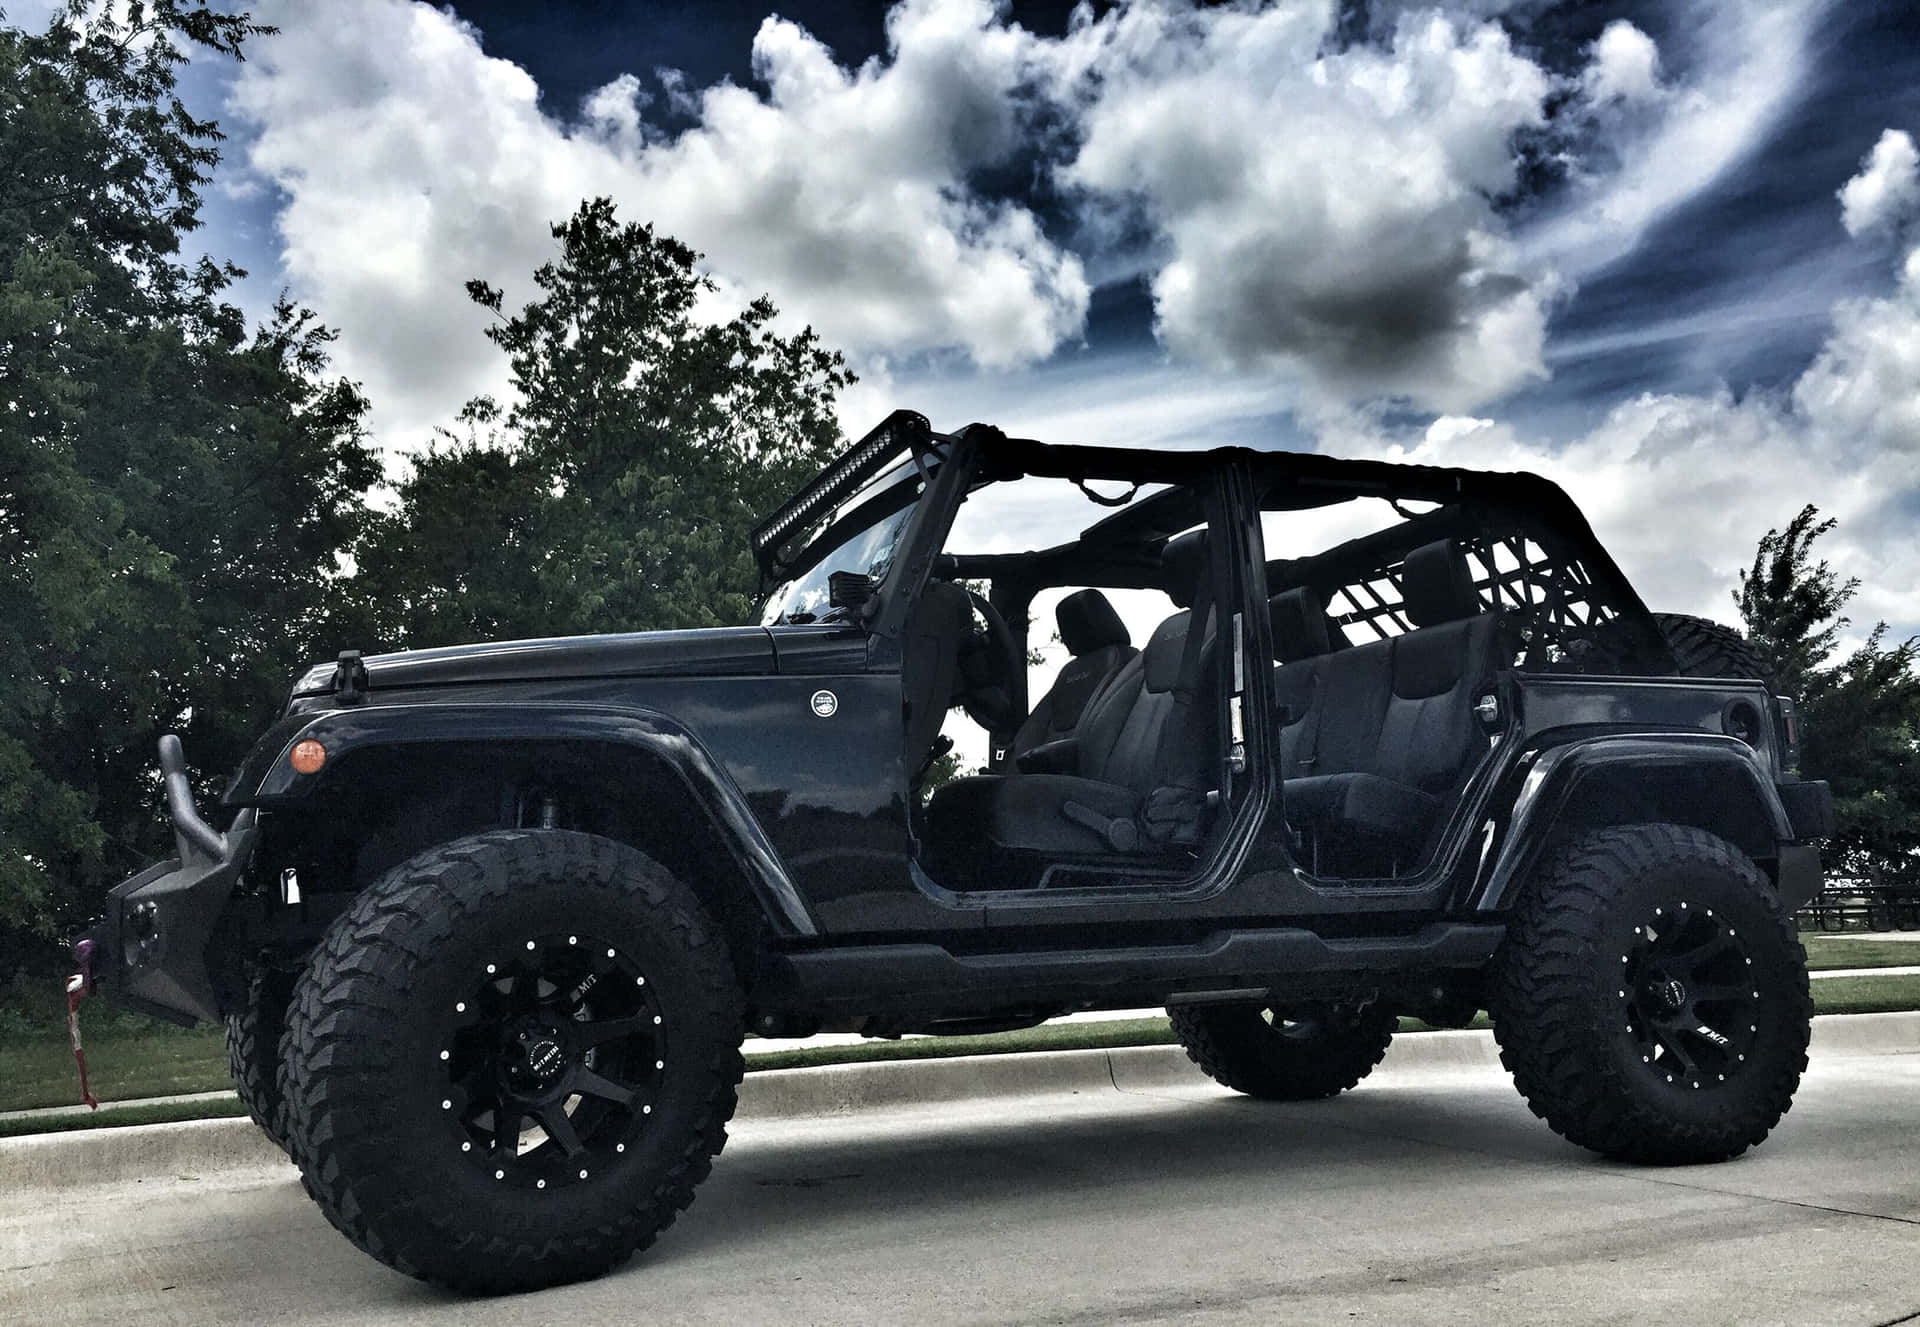 Making a statement with this powerful Black Jeep